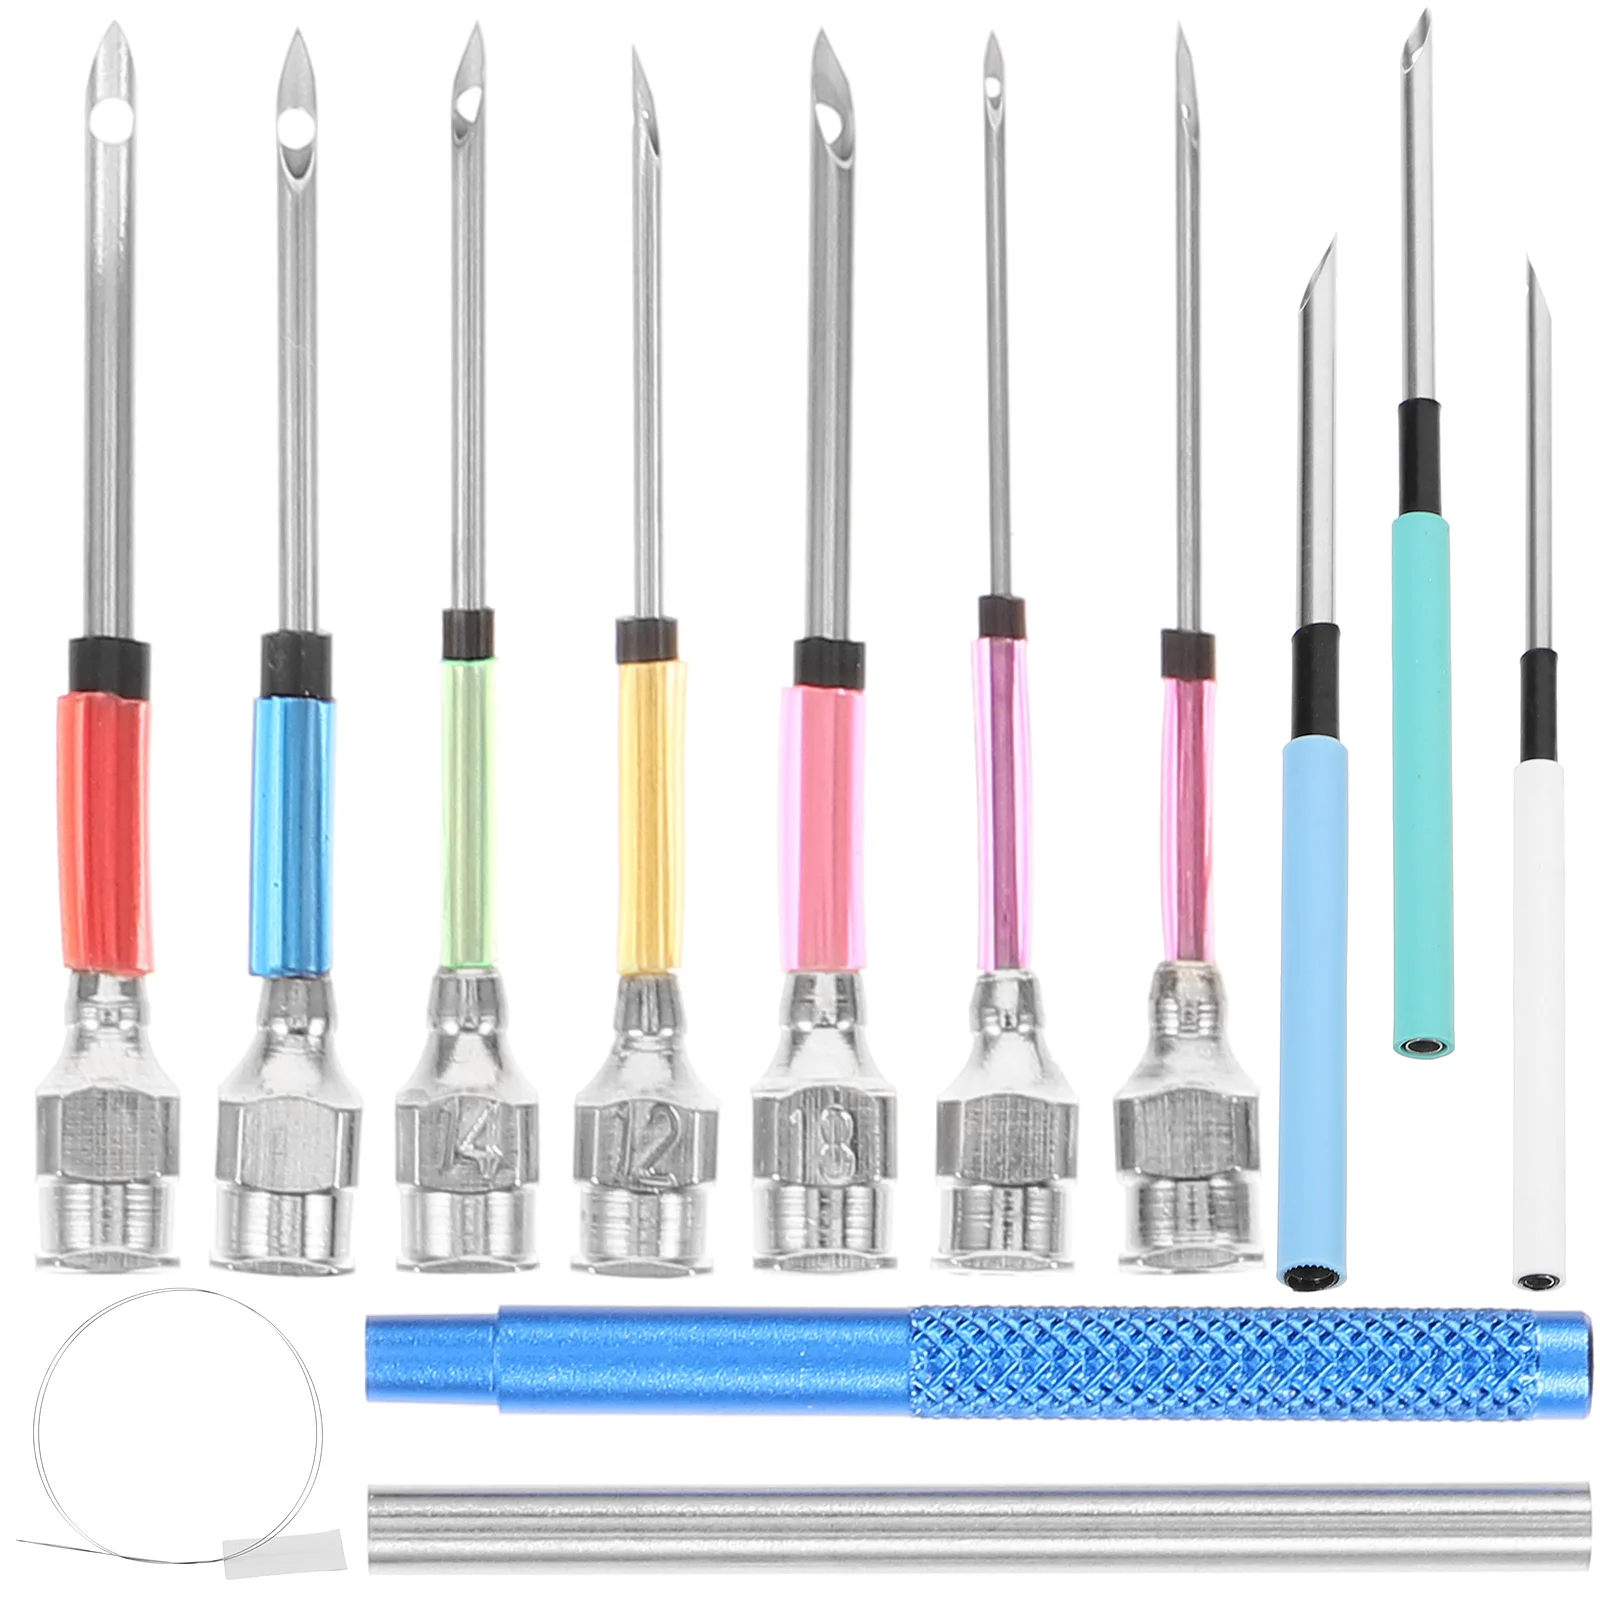 

Embroidery Tool Cross Stitch Kit Needles Punch Kits Adults Beginner Knitting Tools Metal Threader